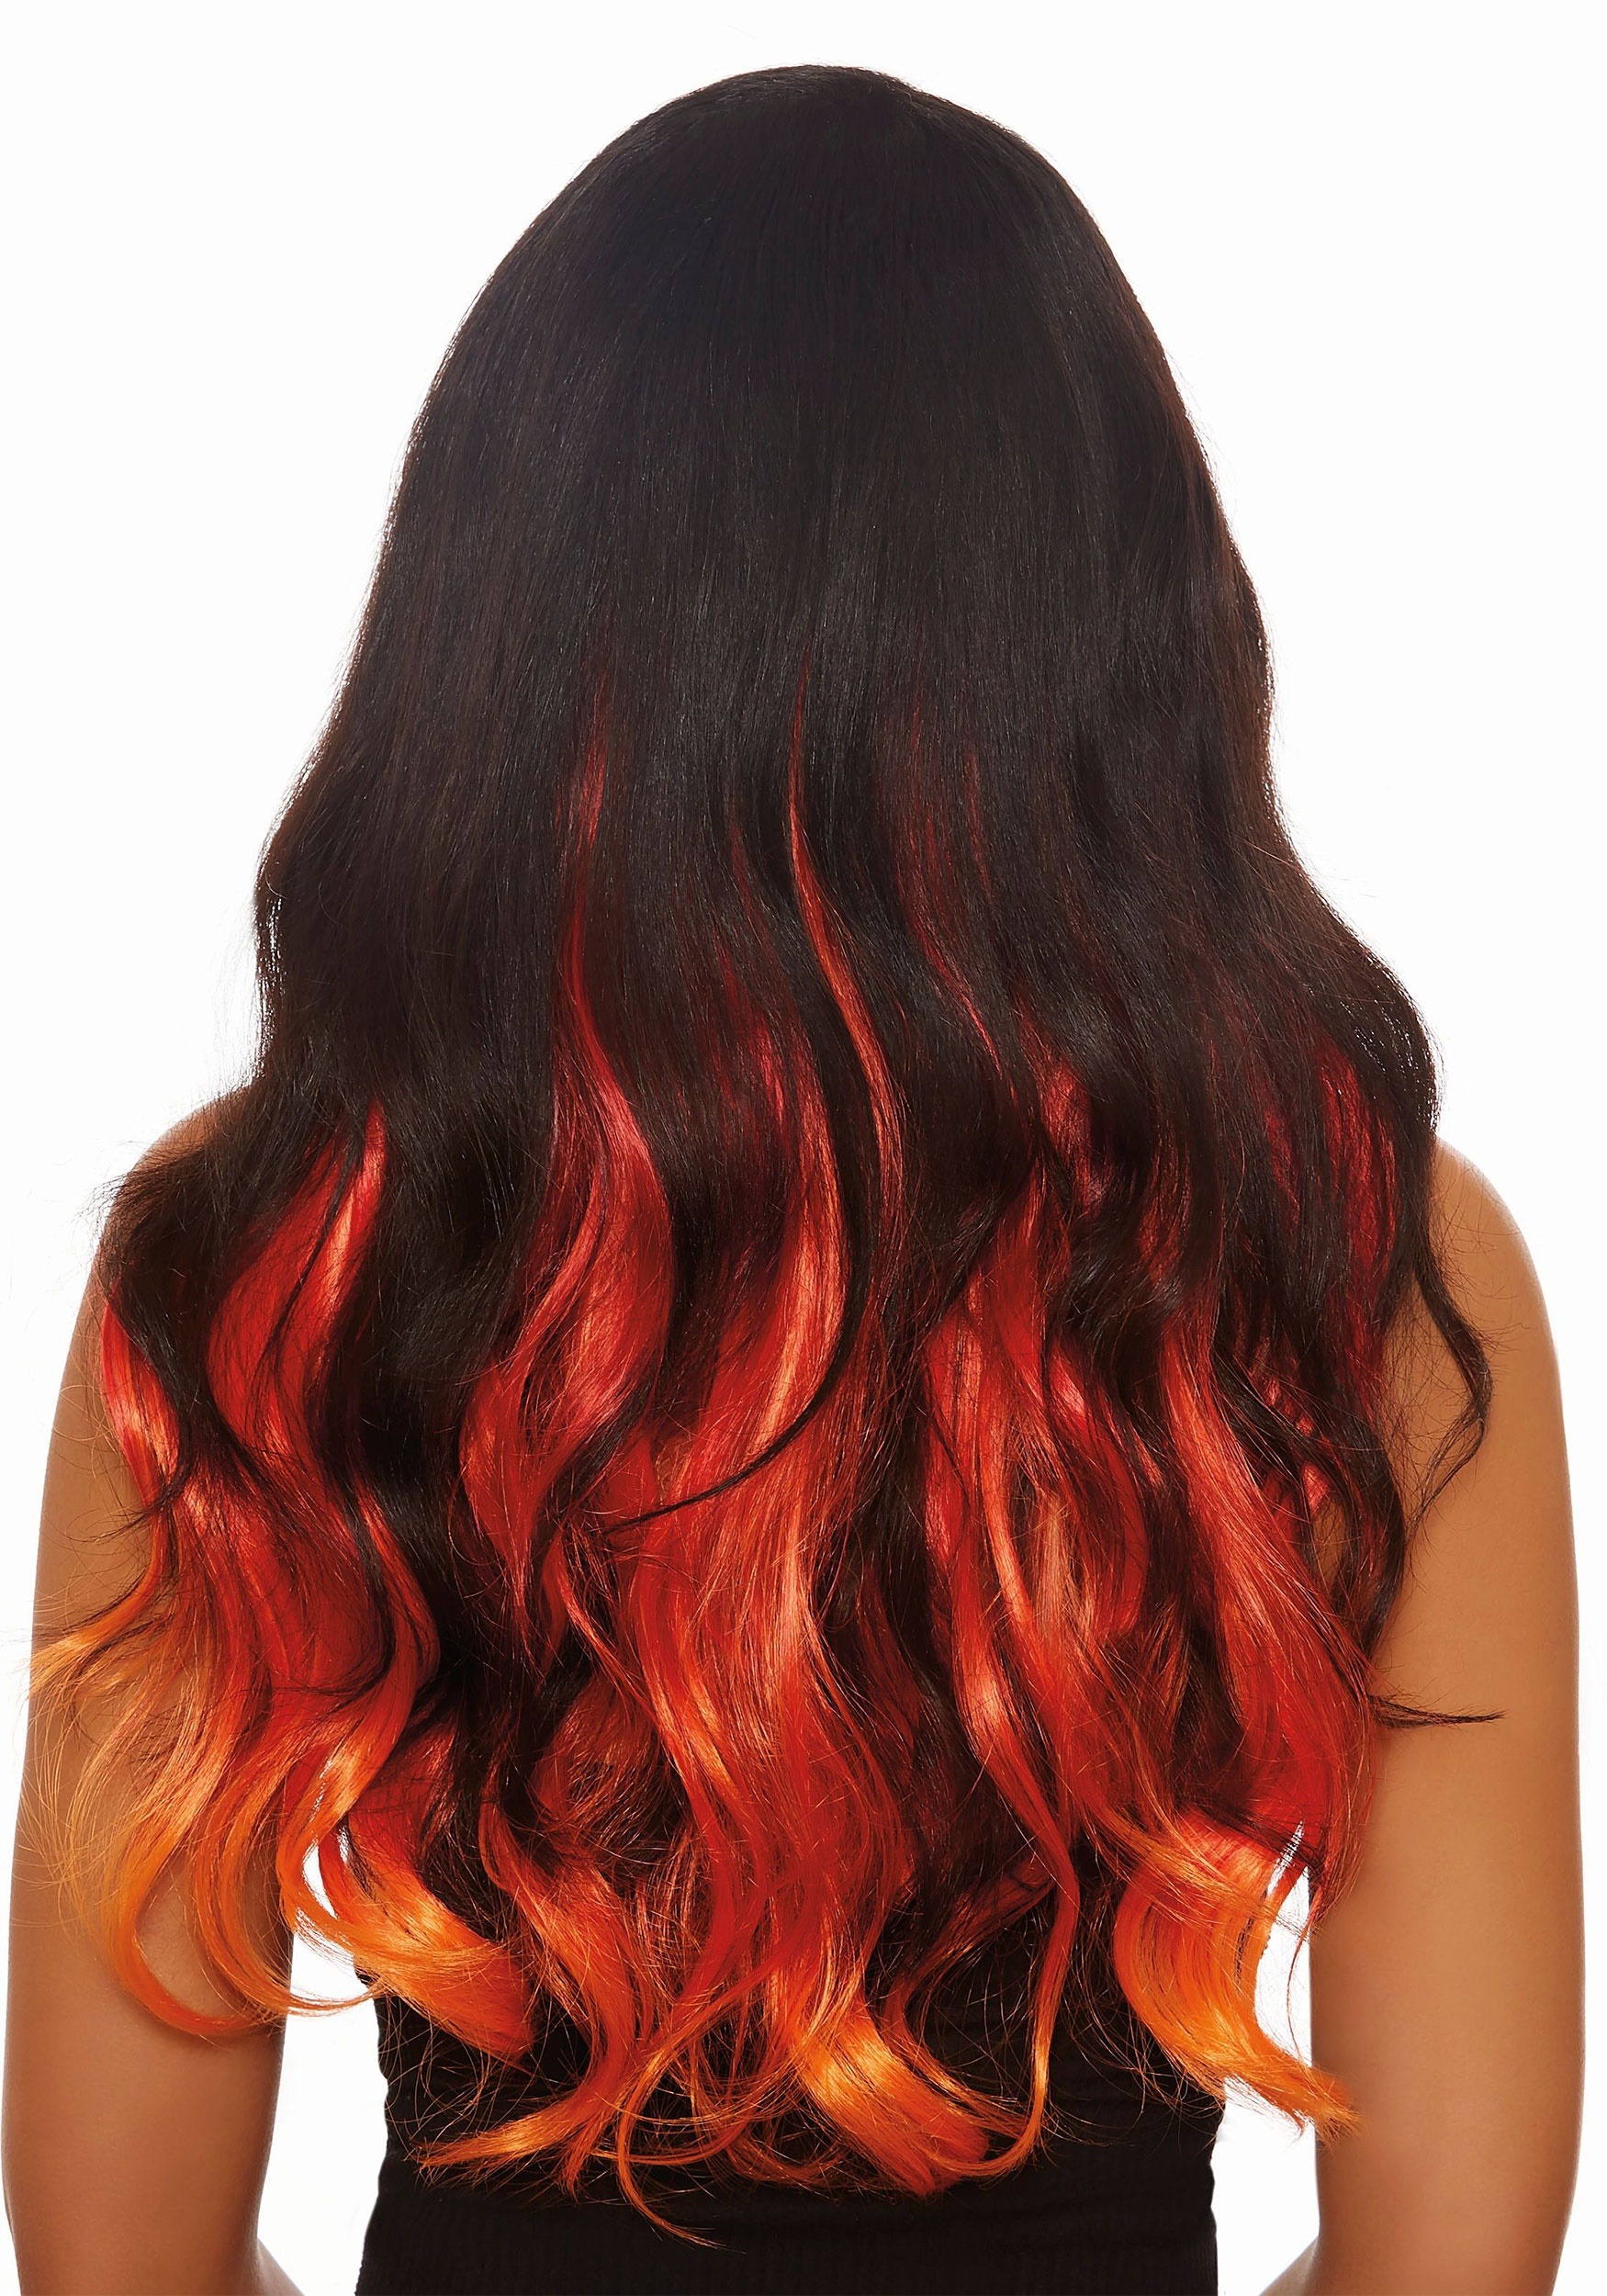 Long Straight 3 Piece Ombre Burg Red Orange Hair Extensions